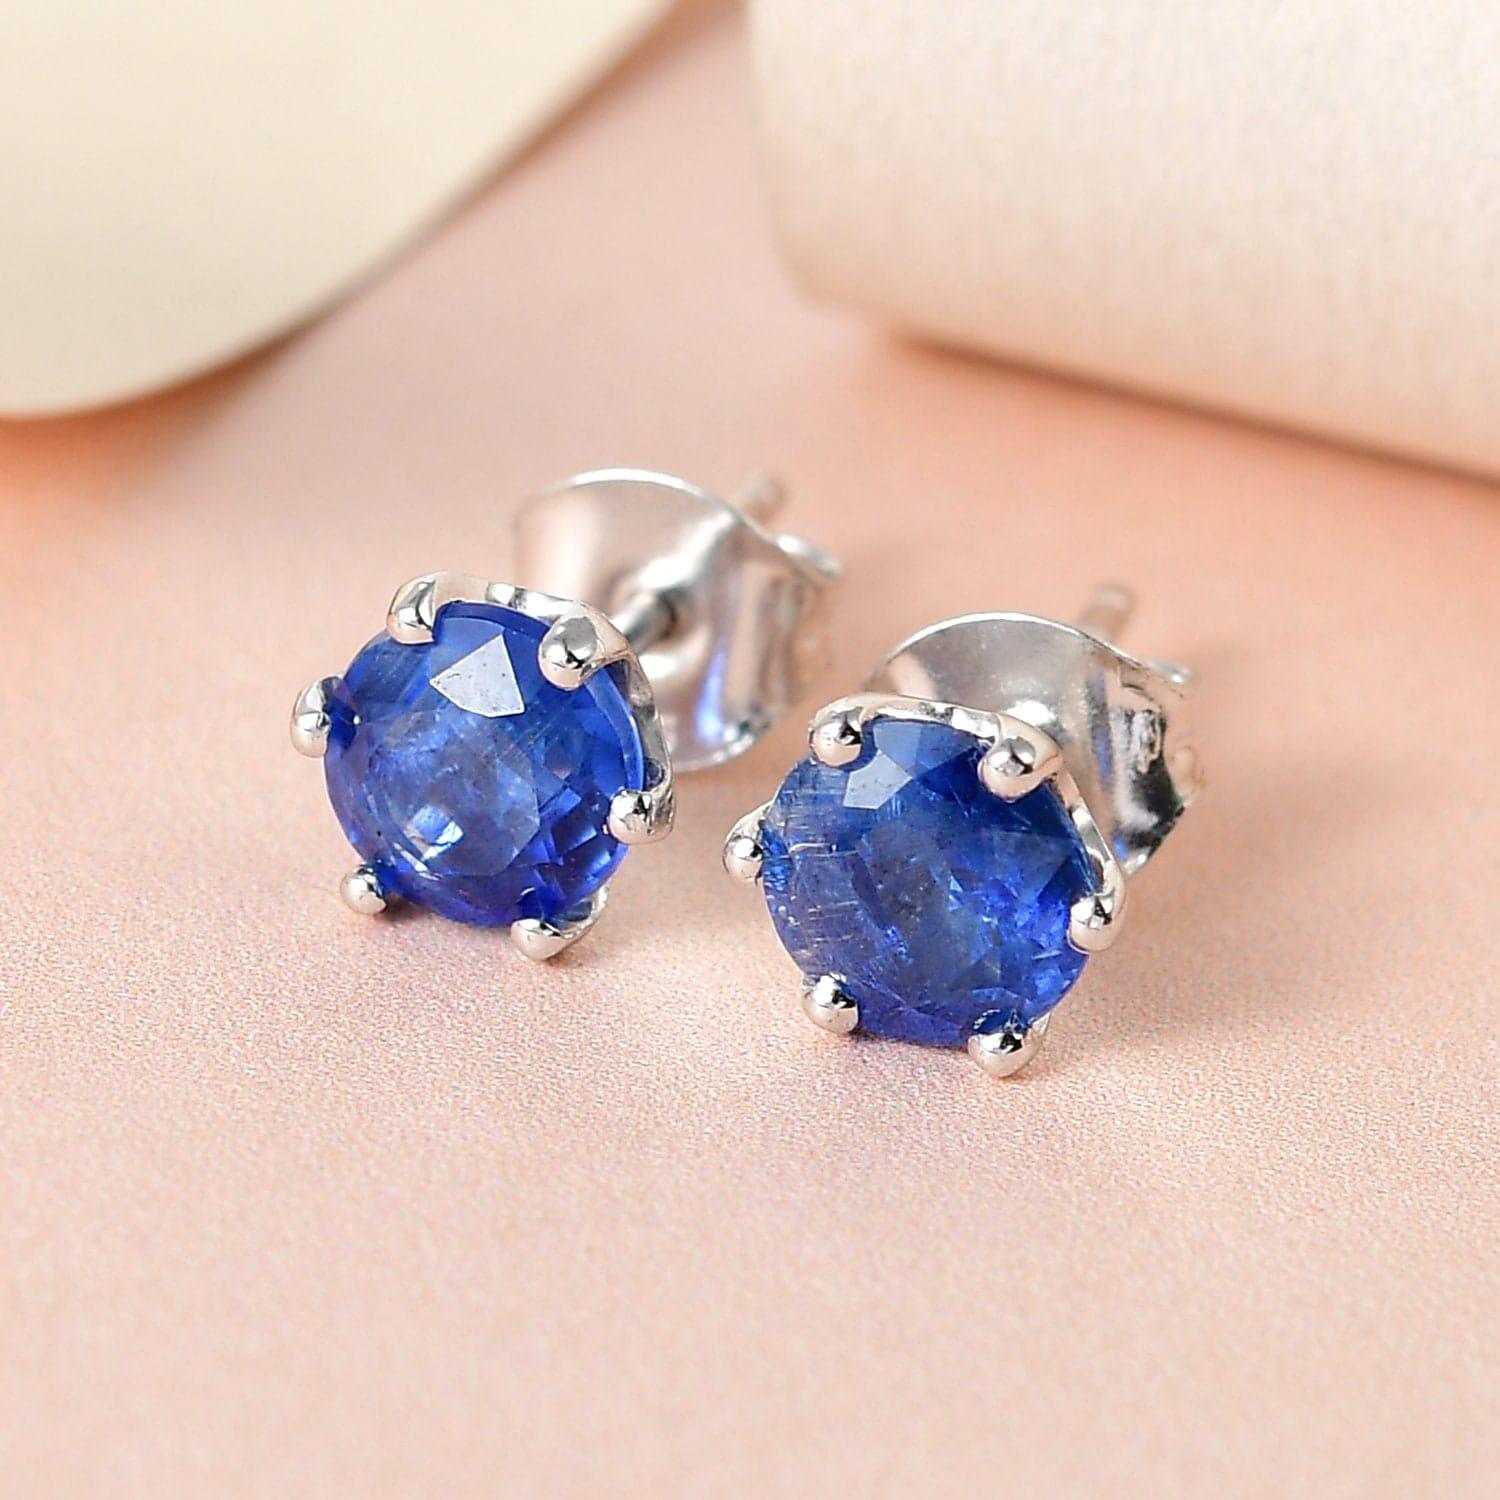 Kyanite Round Studs earrings, 925 Sterling Silver, 6 Prong Stud, Platinum Plated, Solitaire Round Studs by Inspiring Jewellery - Inspiring Jewellery